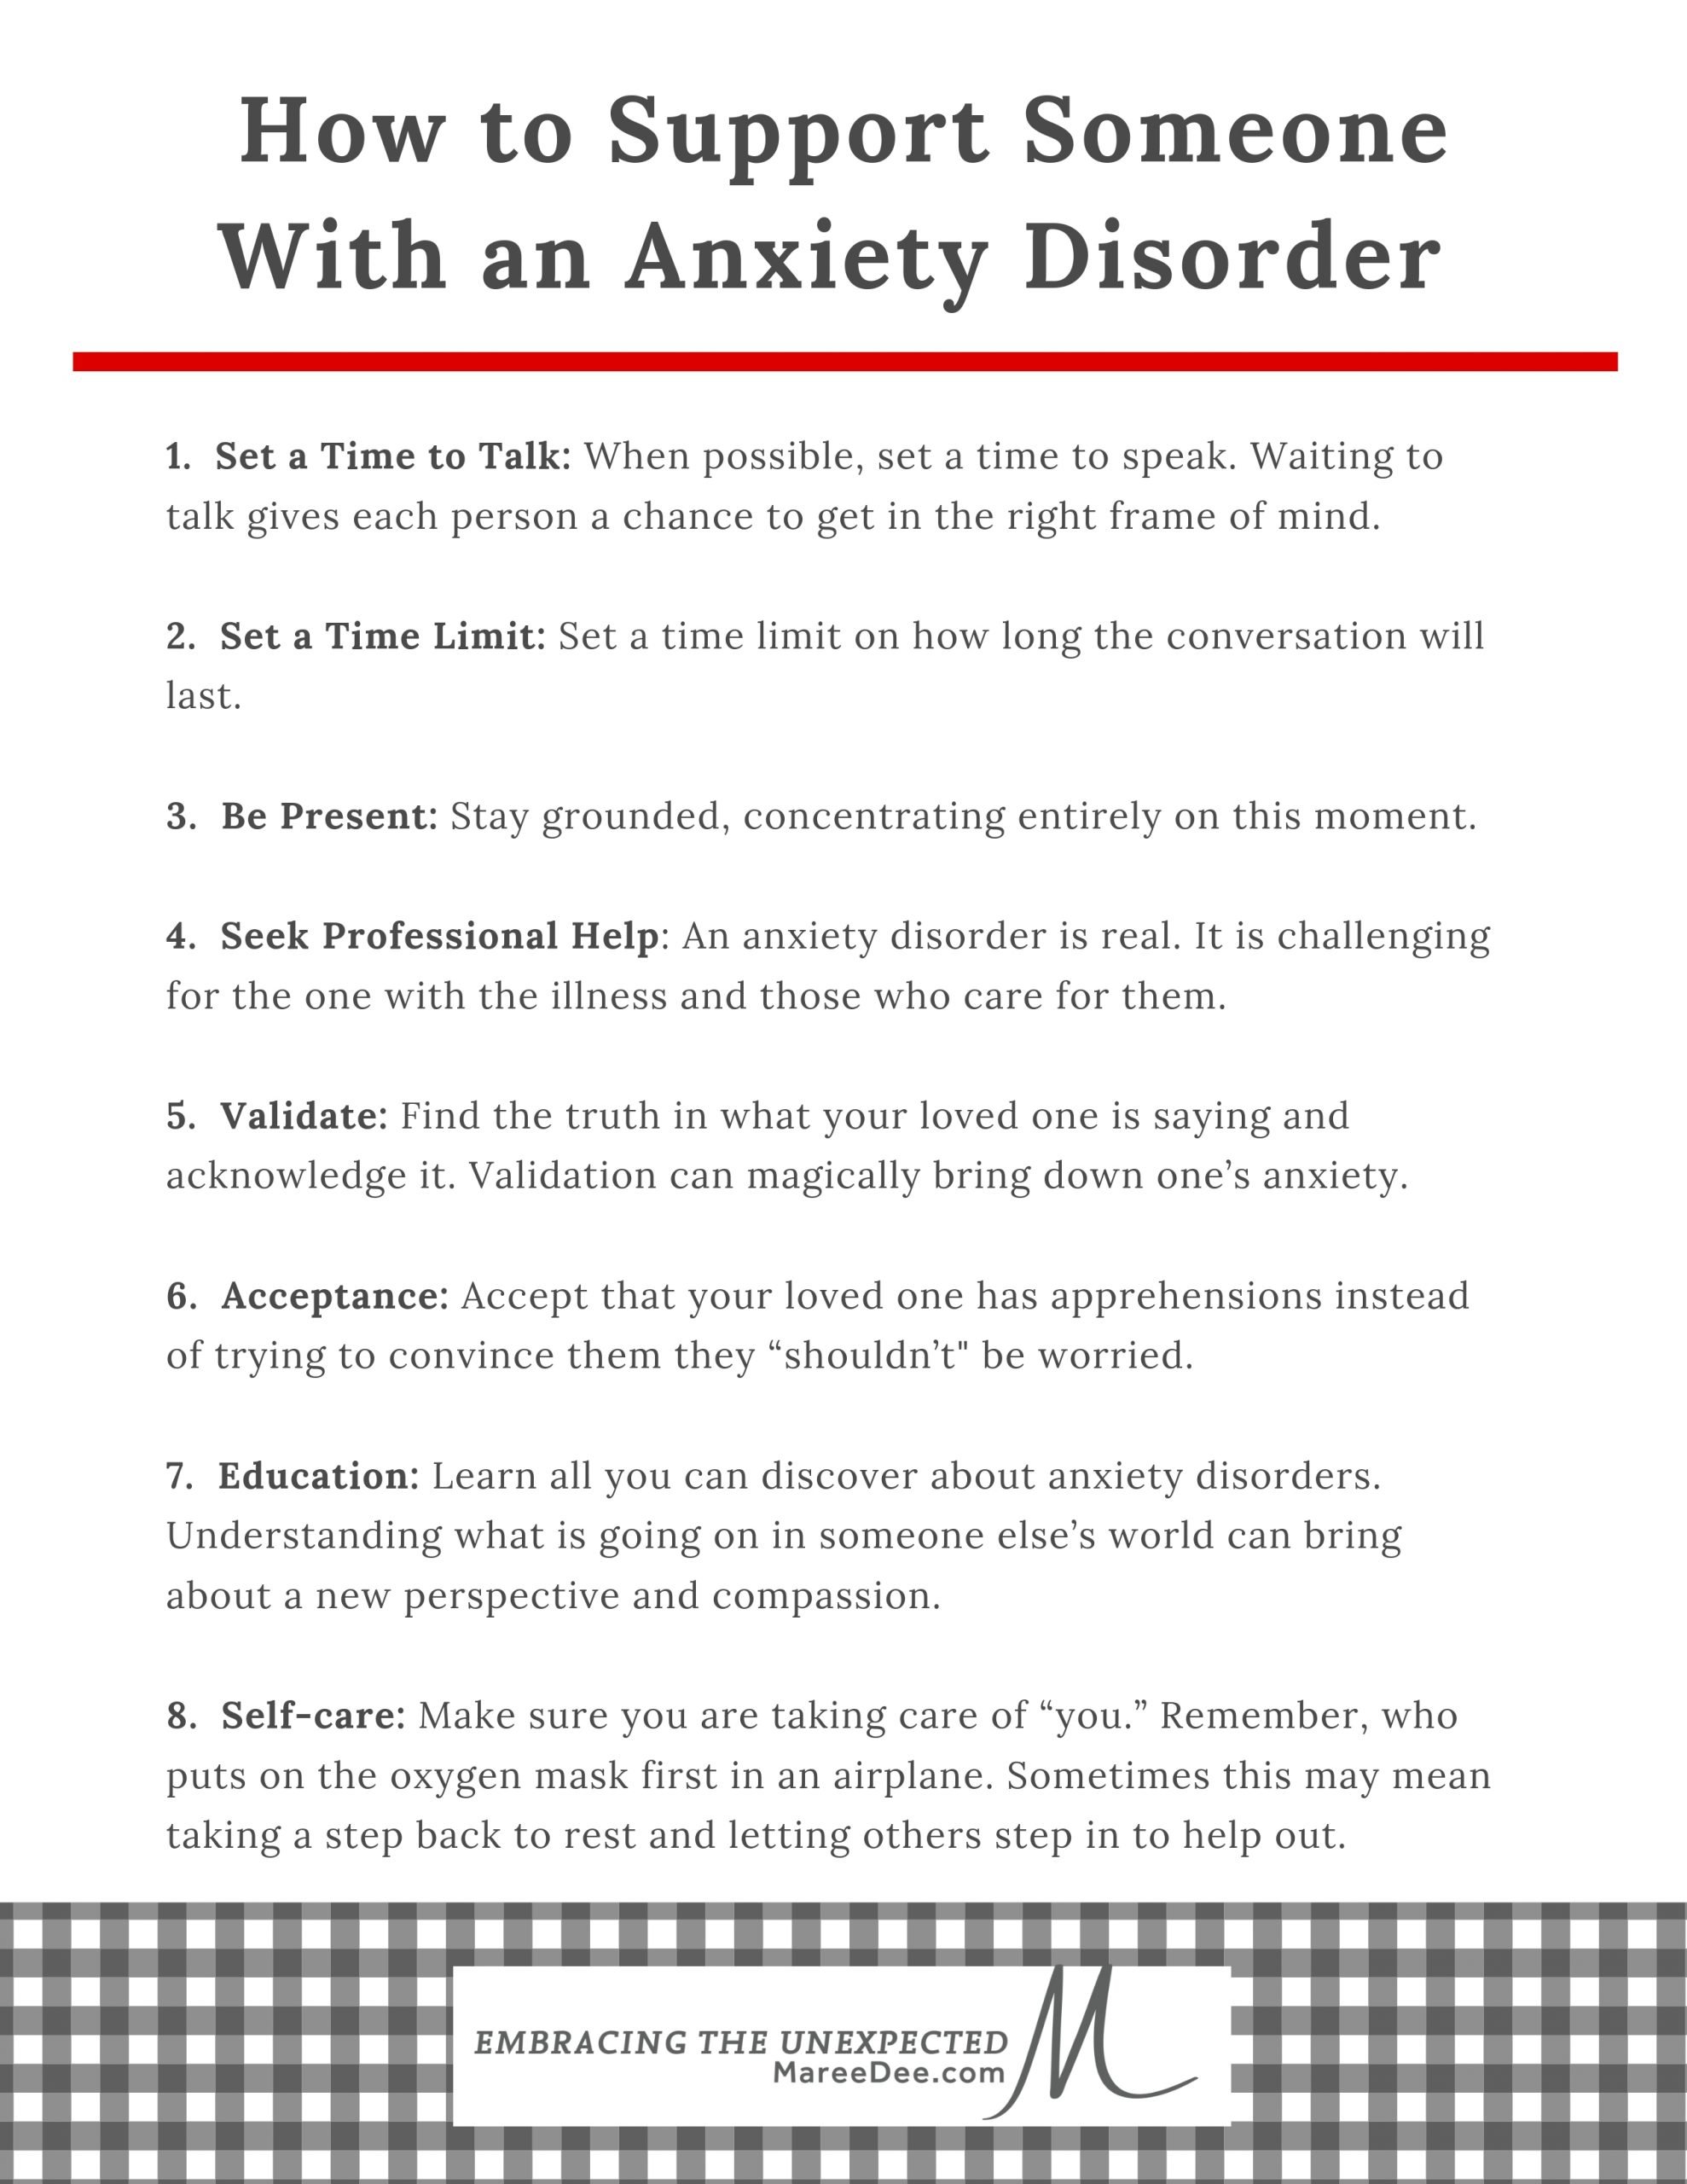 How to Support Someone With an Anxiety Disorder